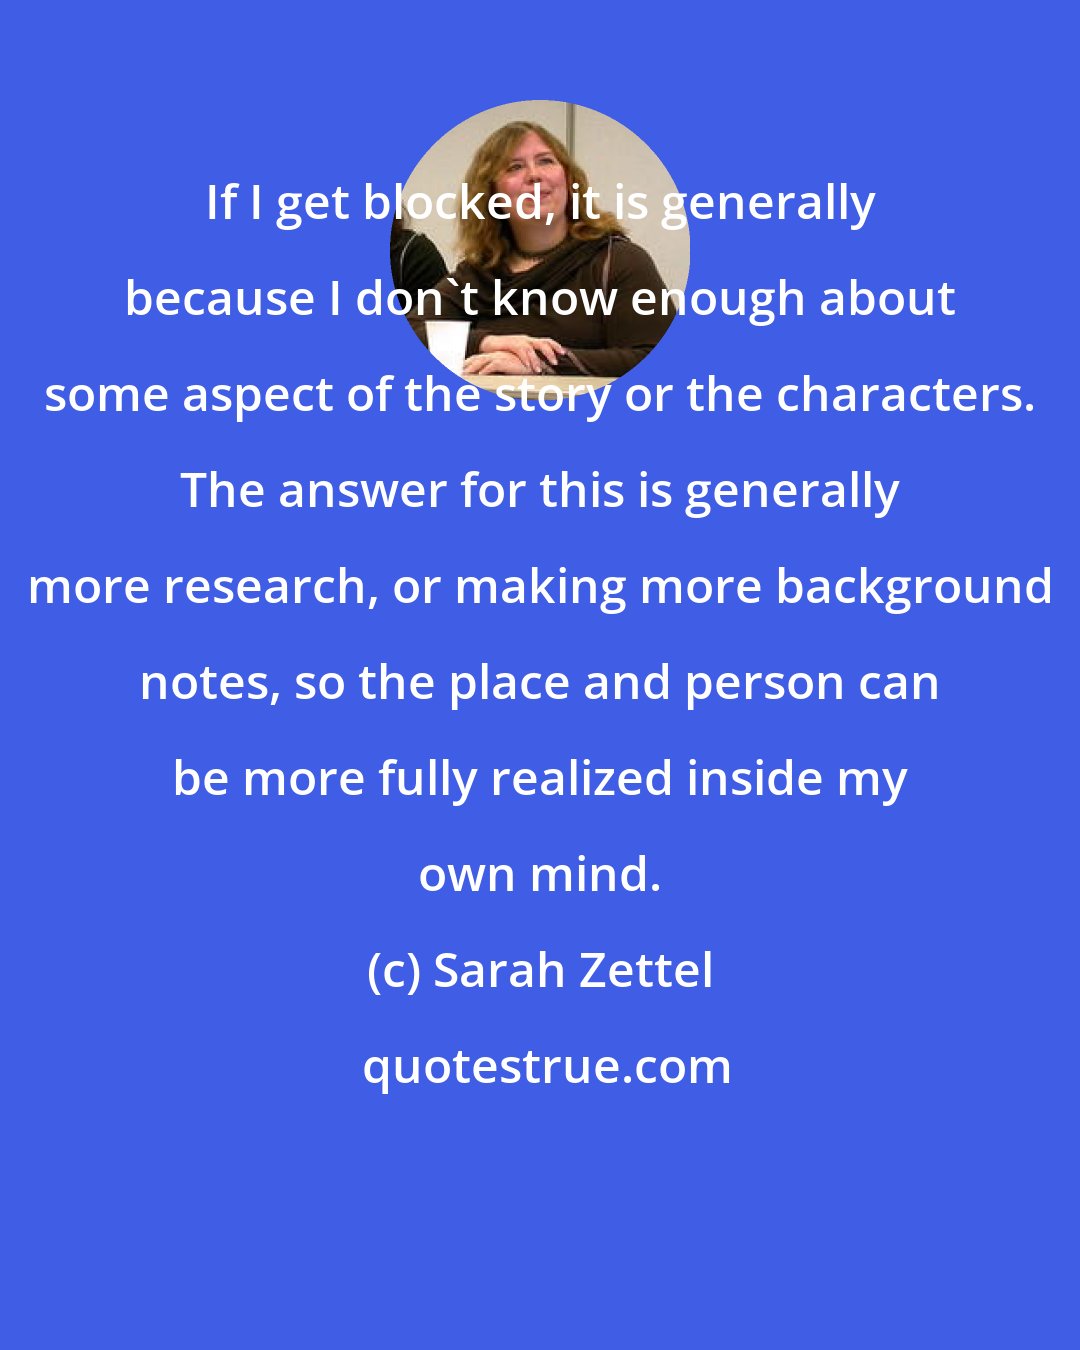 Sarah Zettel: If I get blocked, it is generally because I don't know enough about some aspect of the story or the characters. The answer for this is generally more research, or making more background notes, so the place and person can be more fully realized inside my own mind.